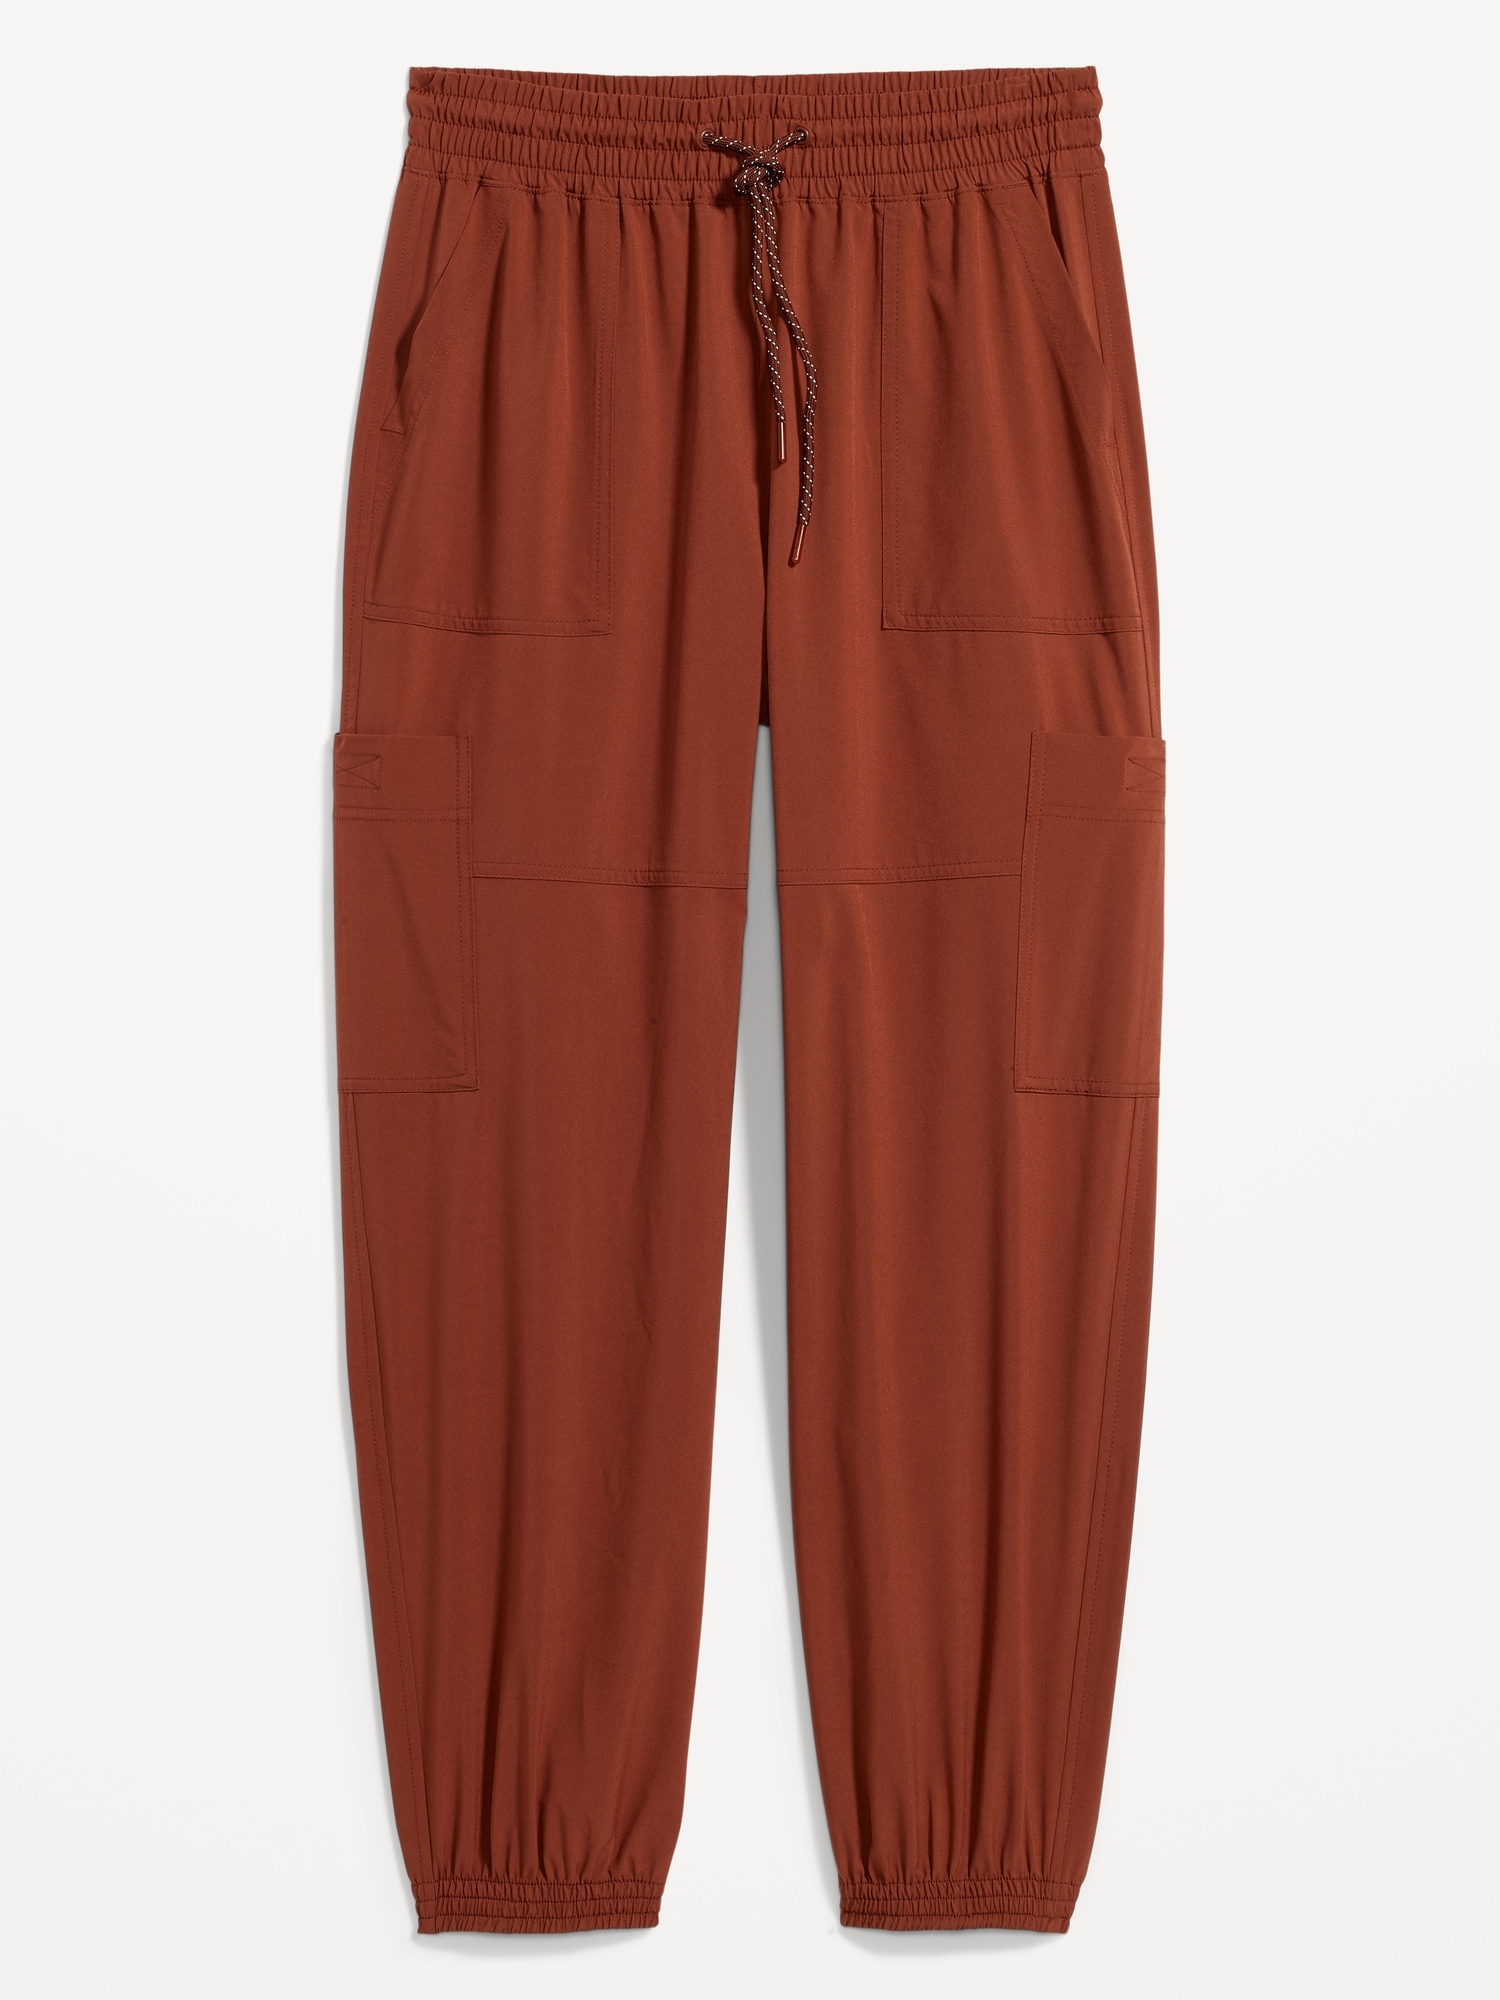 High-Waisted StretchTech Cargo Jogger Pants for Women, Old Navy